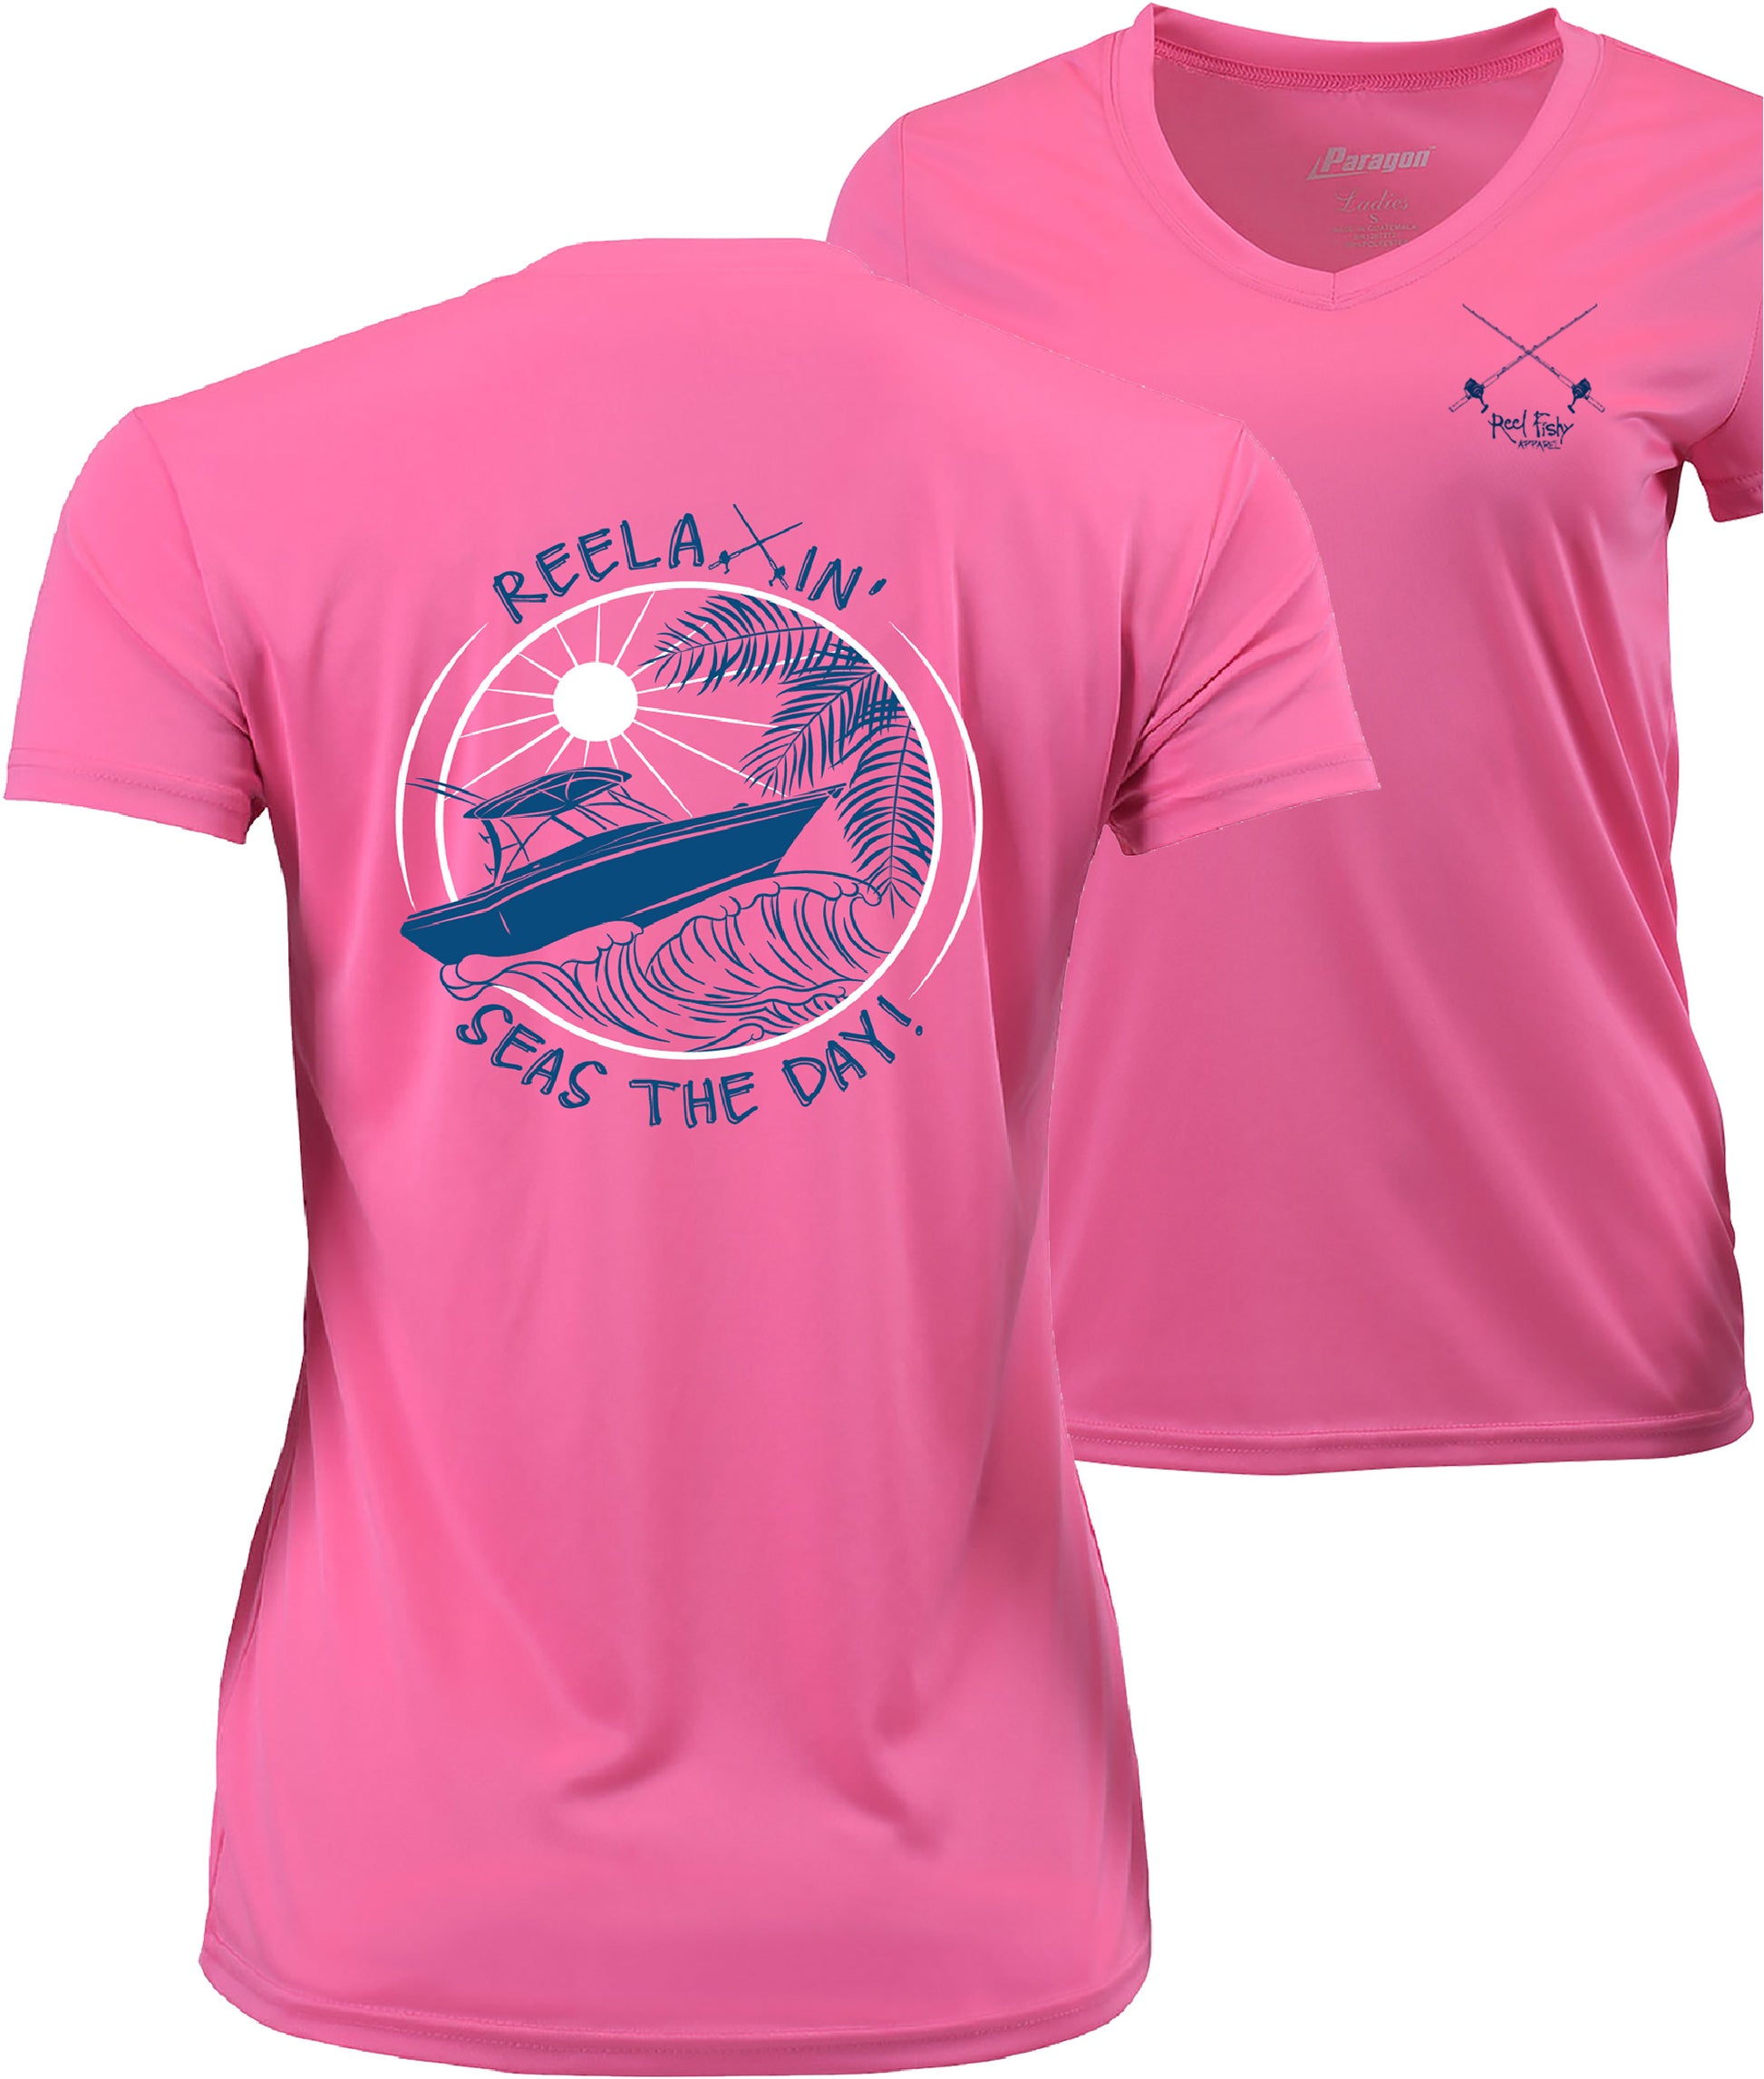 Ladies Hot Pink Reelaxin' V-neck Performance Dry-Fit Fishing Short Sleeve Shirts, 50+ UPF Sun Protection - Reel Fishy Apparel